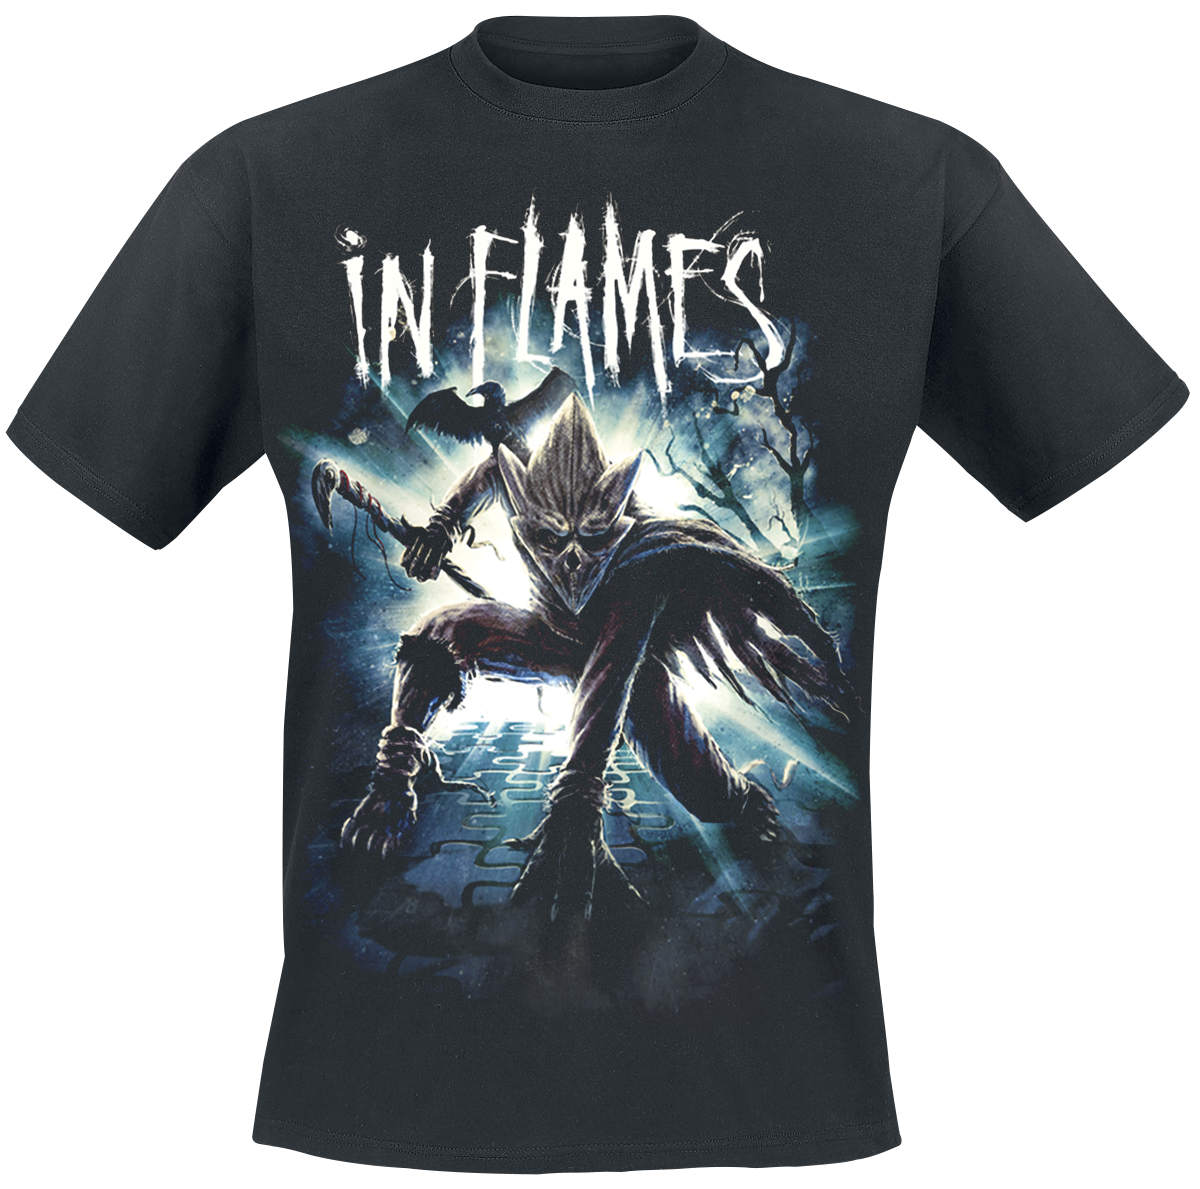 In Flames - Here I Am - T-Shirt - black image